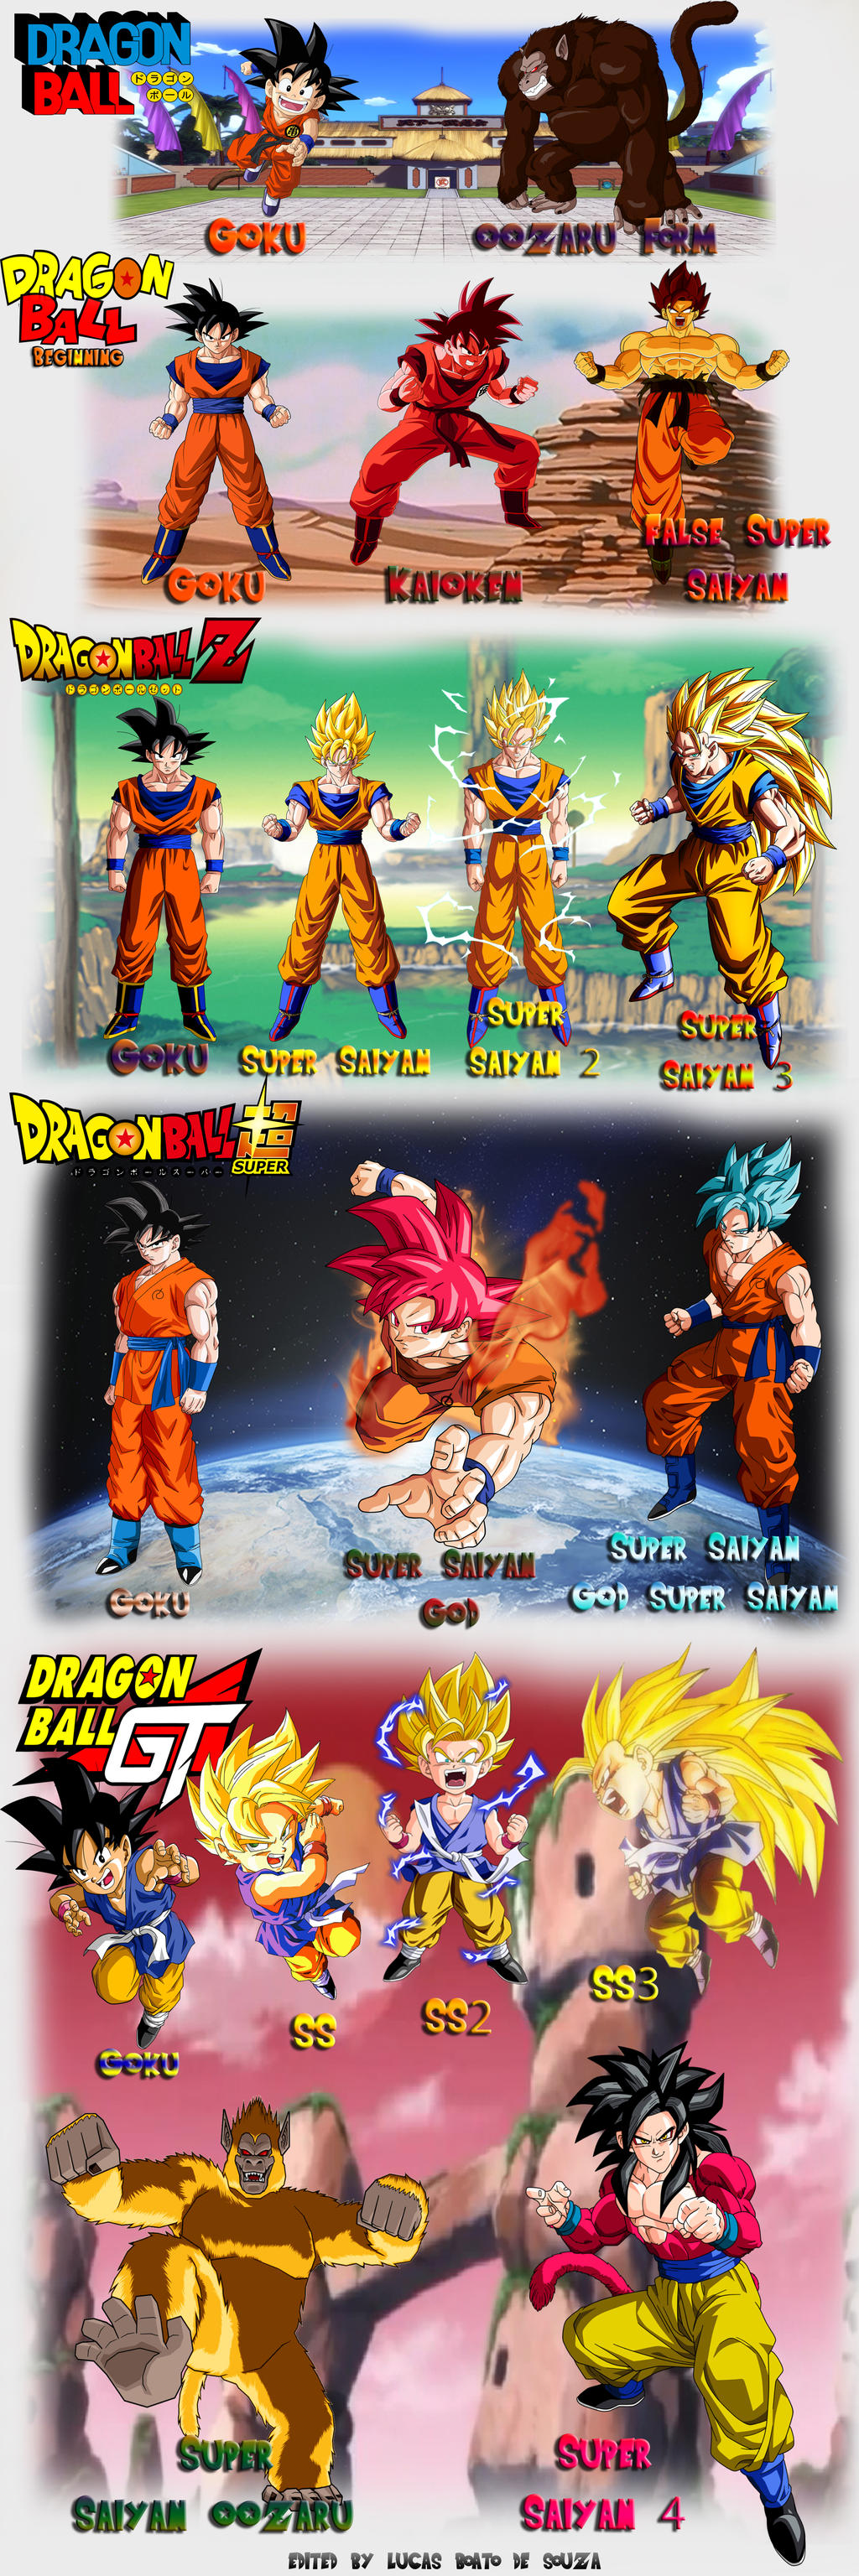 Dragon Ball Super and Dragon Ball GT Wallpaper by LucasBoato on